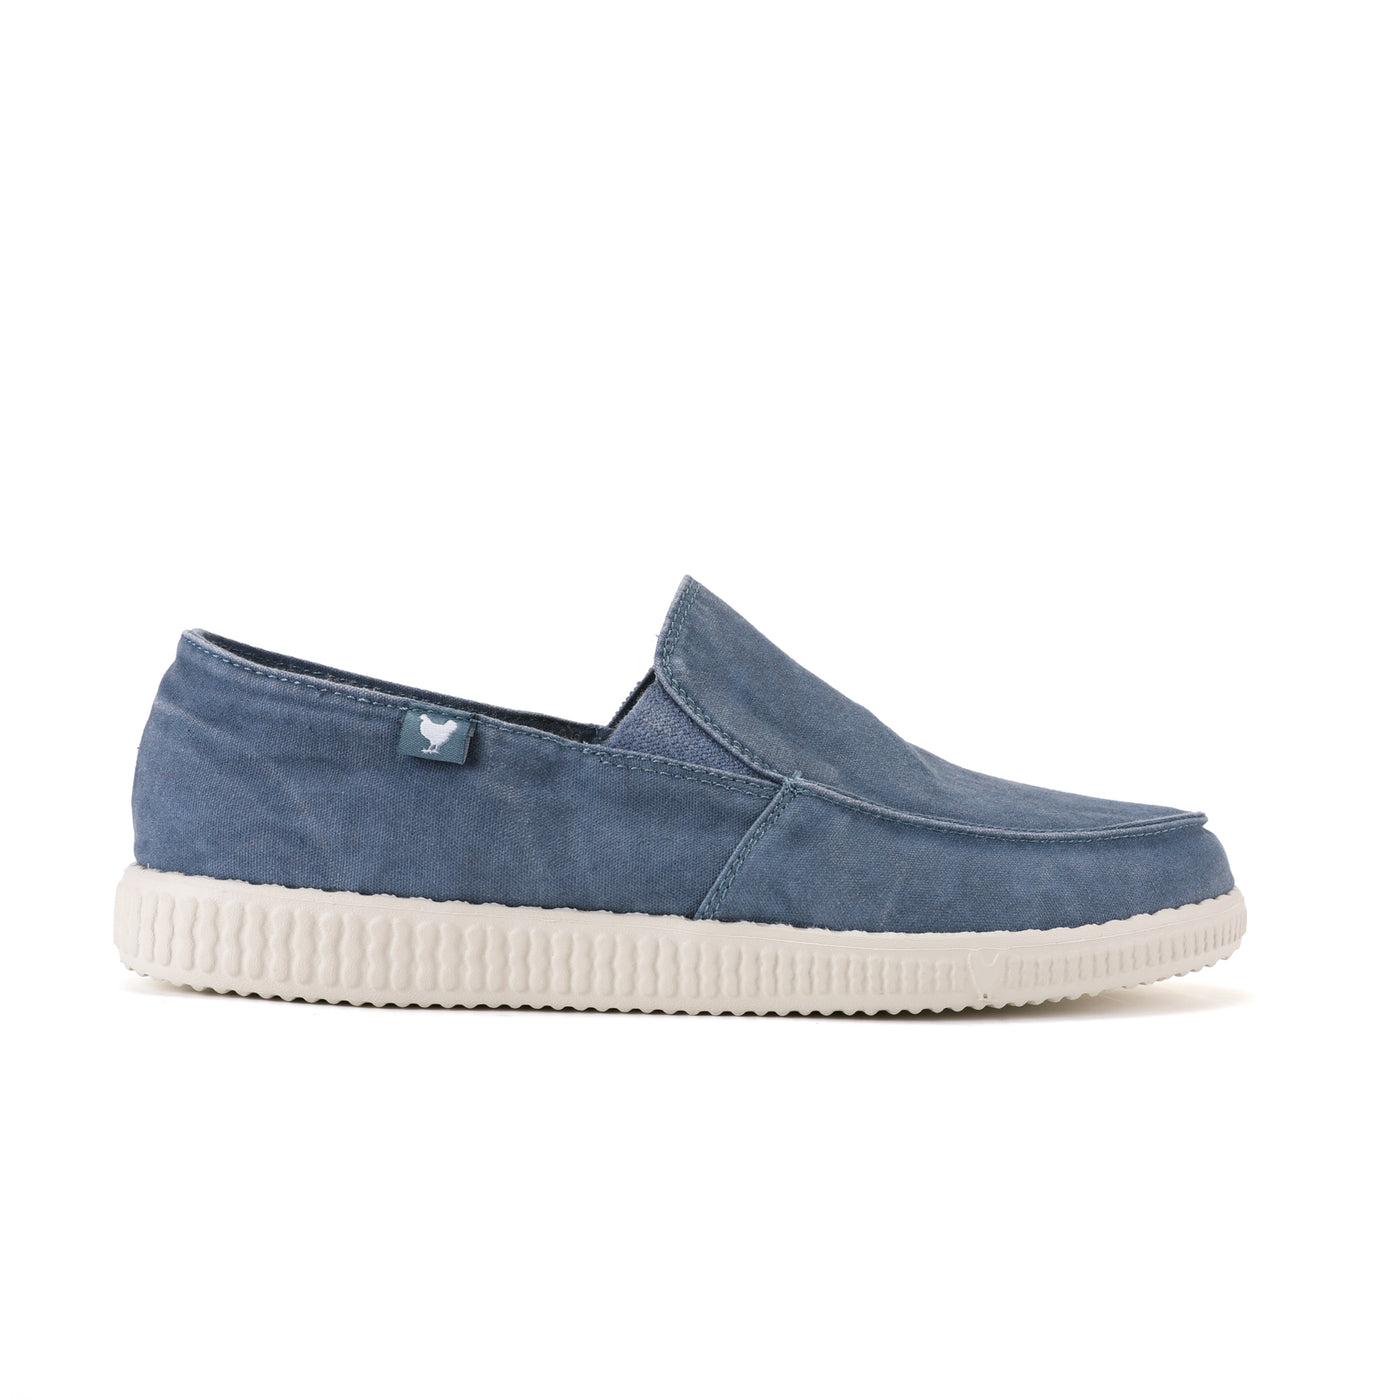 WP150 Blue Washed Canvas Slip-On Loafers